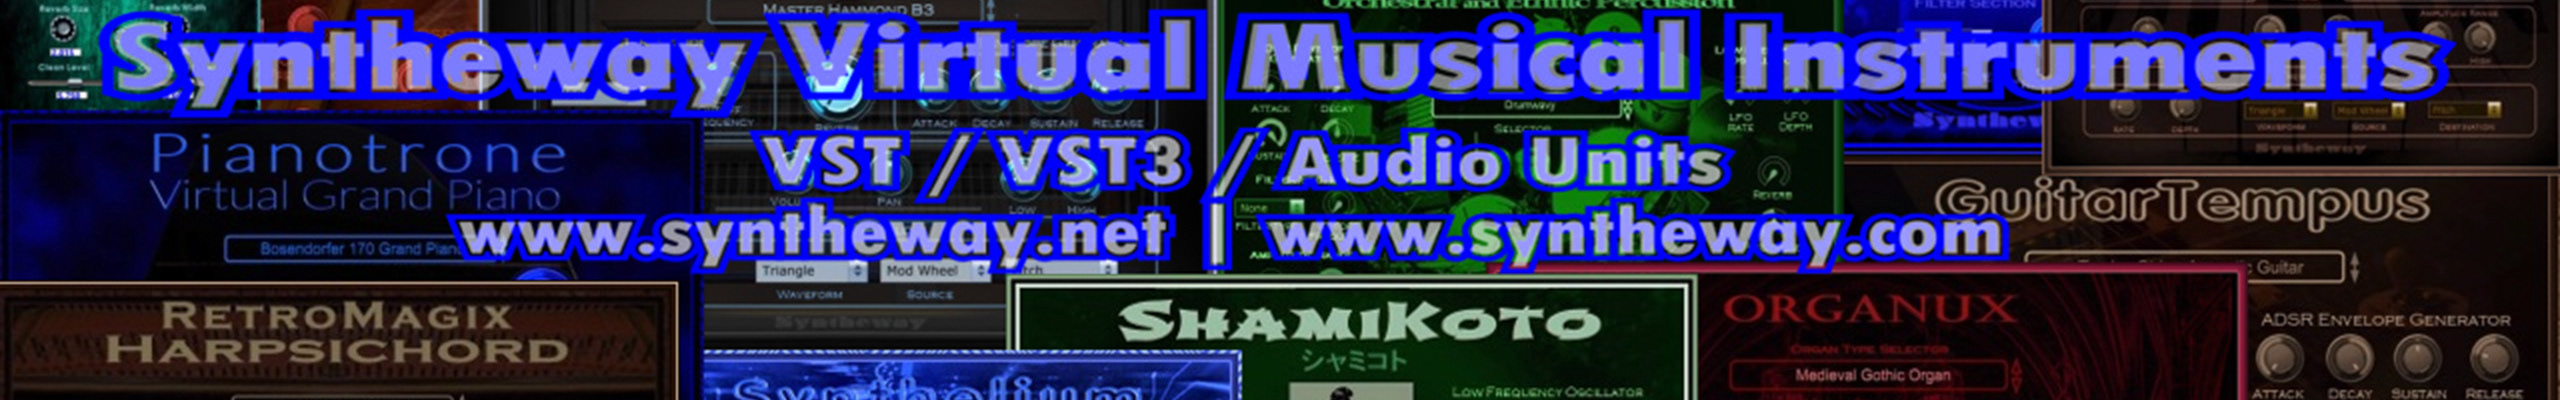 Syntheway Virtual Musical Instruments's profile banner